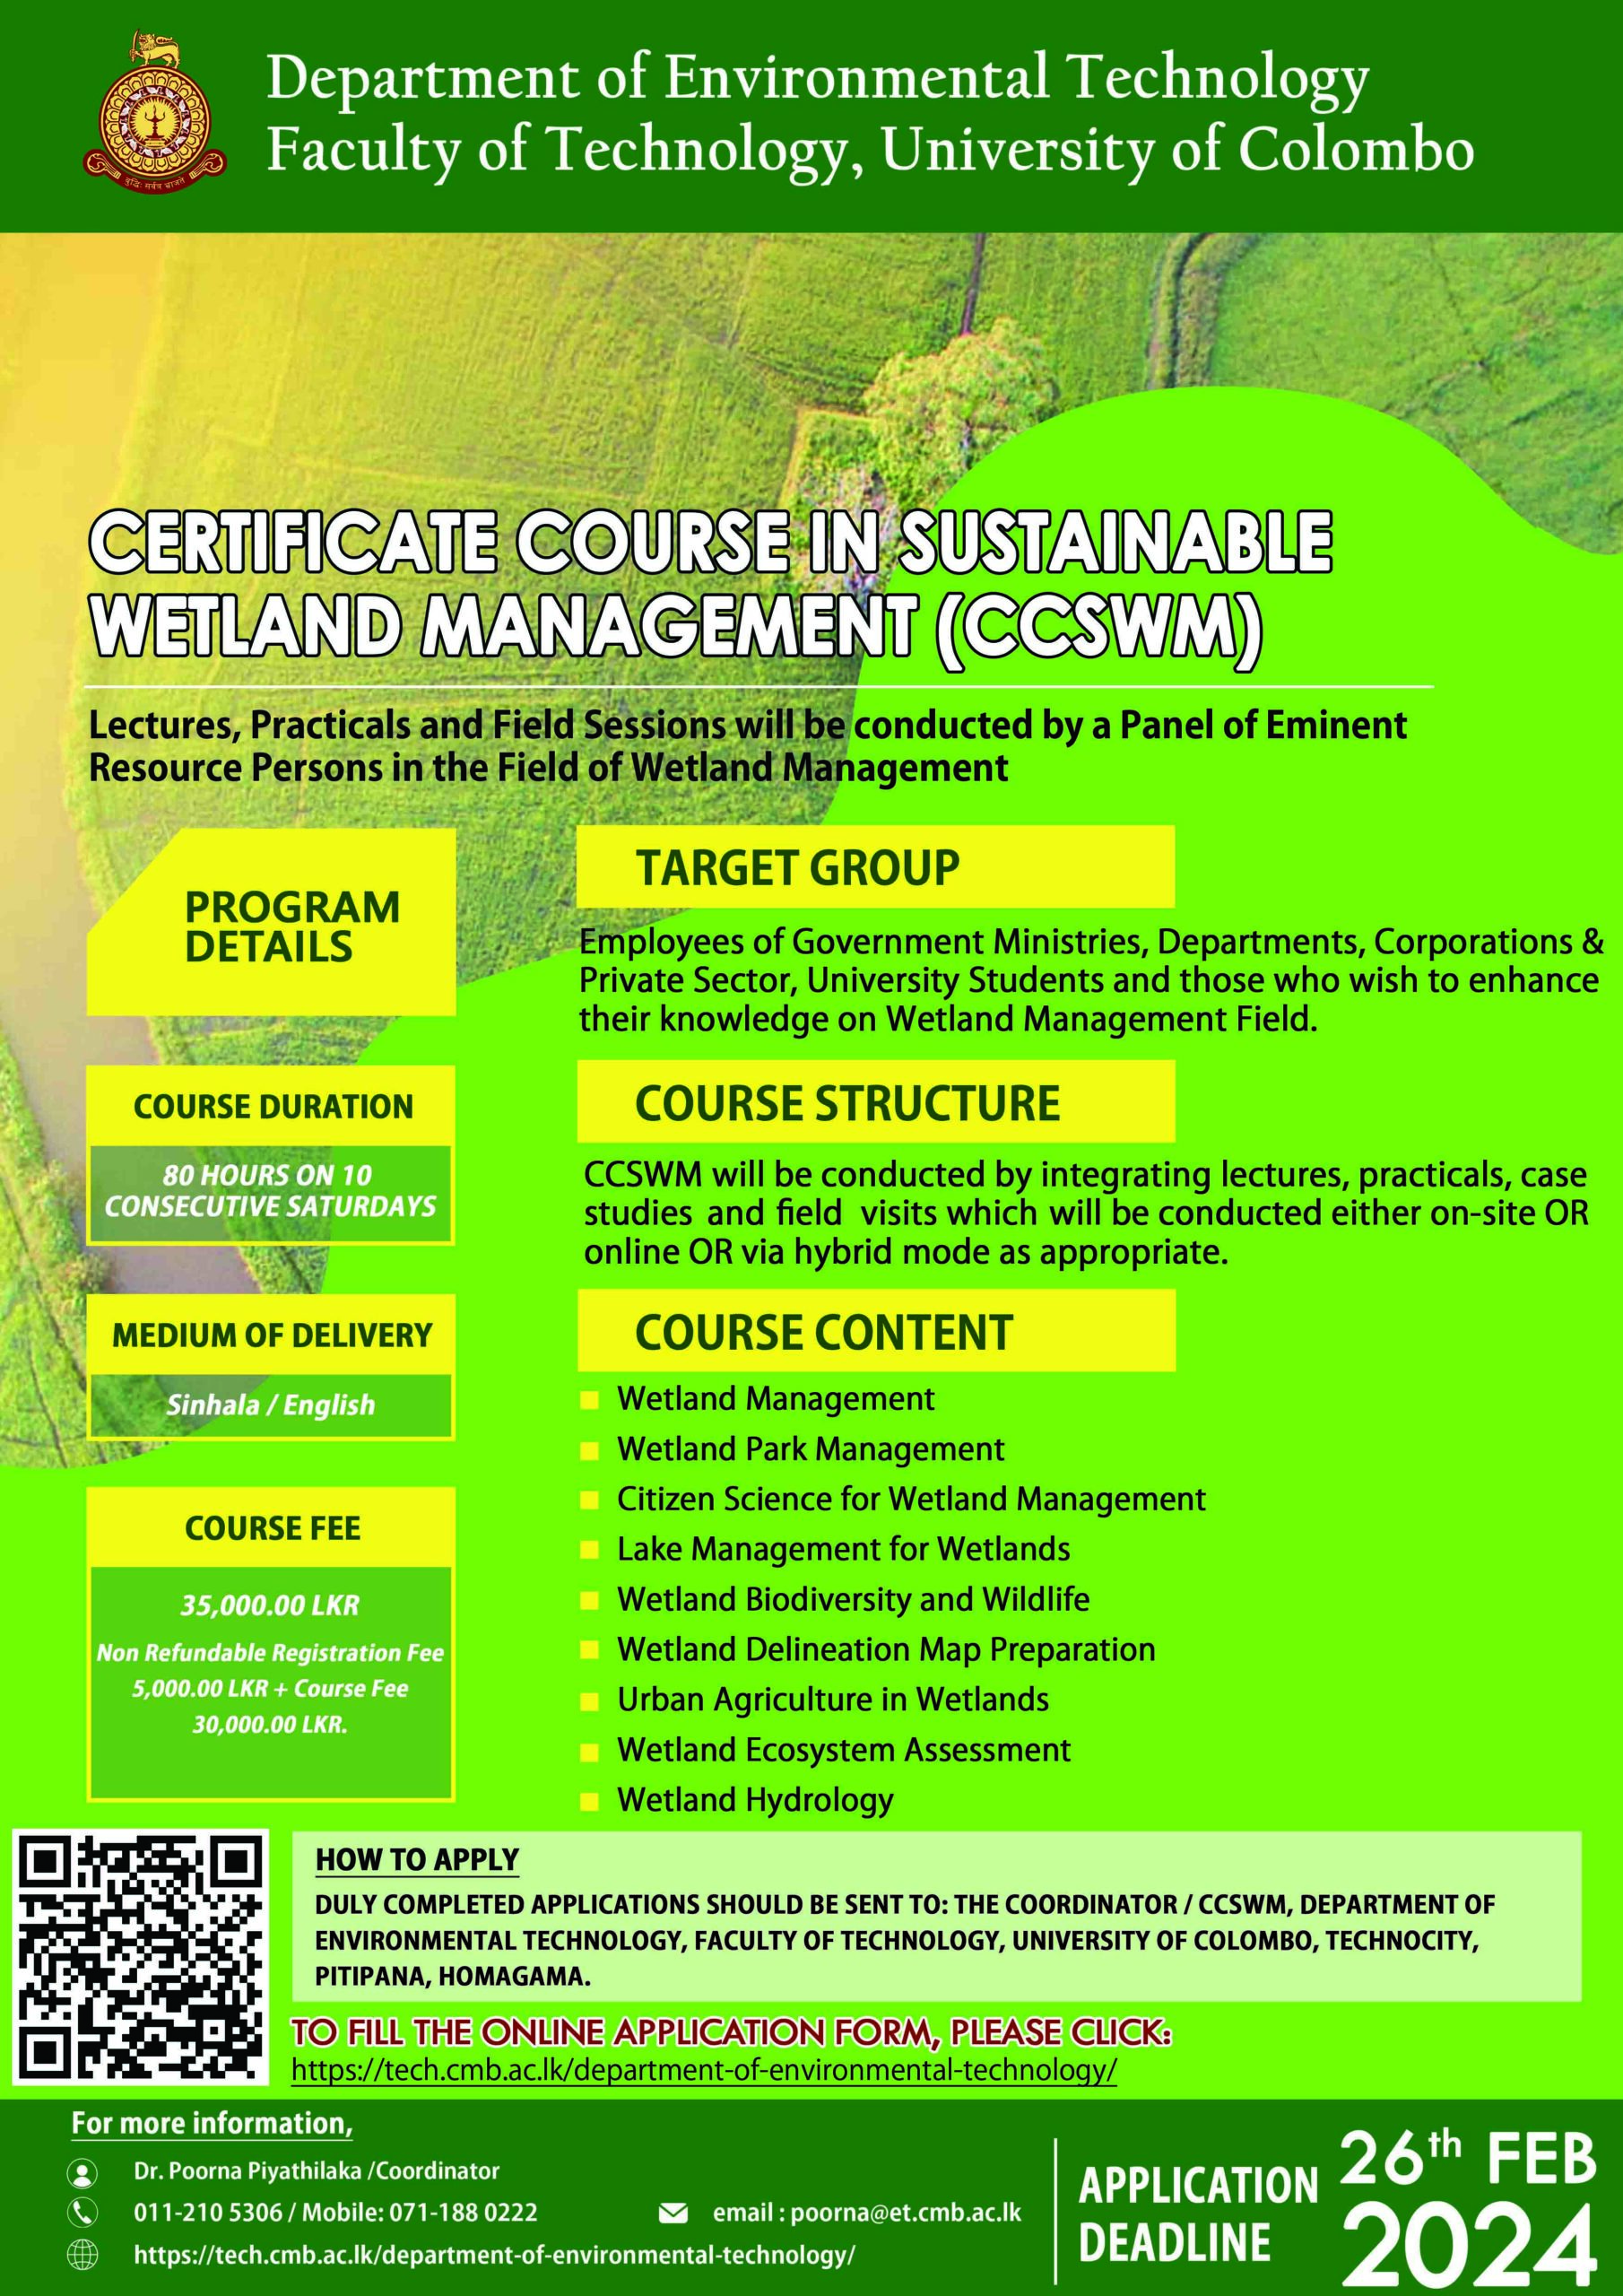 Certificate Course in Sustainable Wetland Management